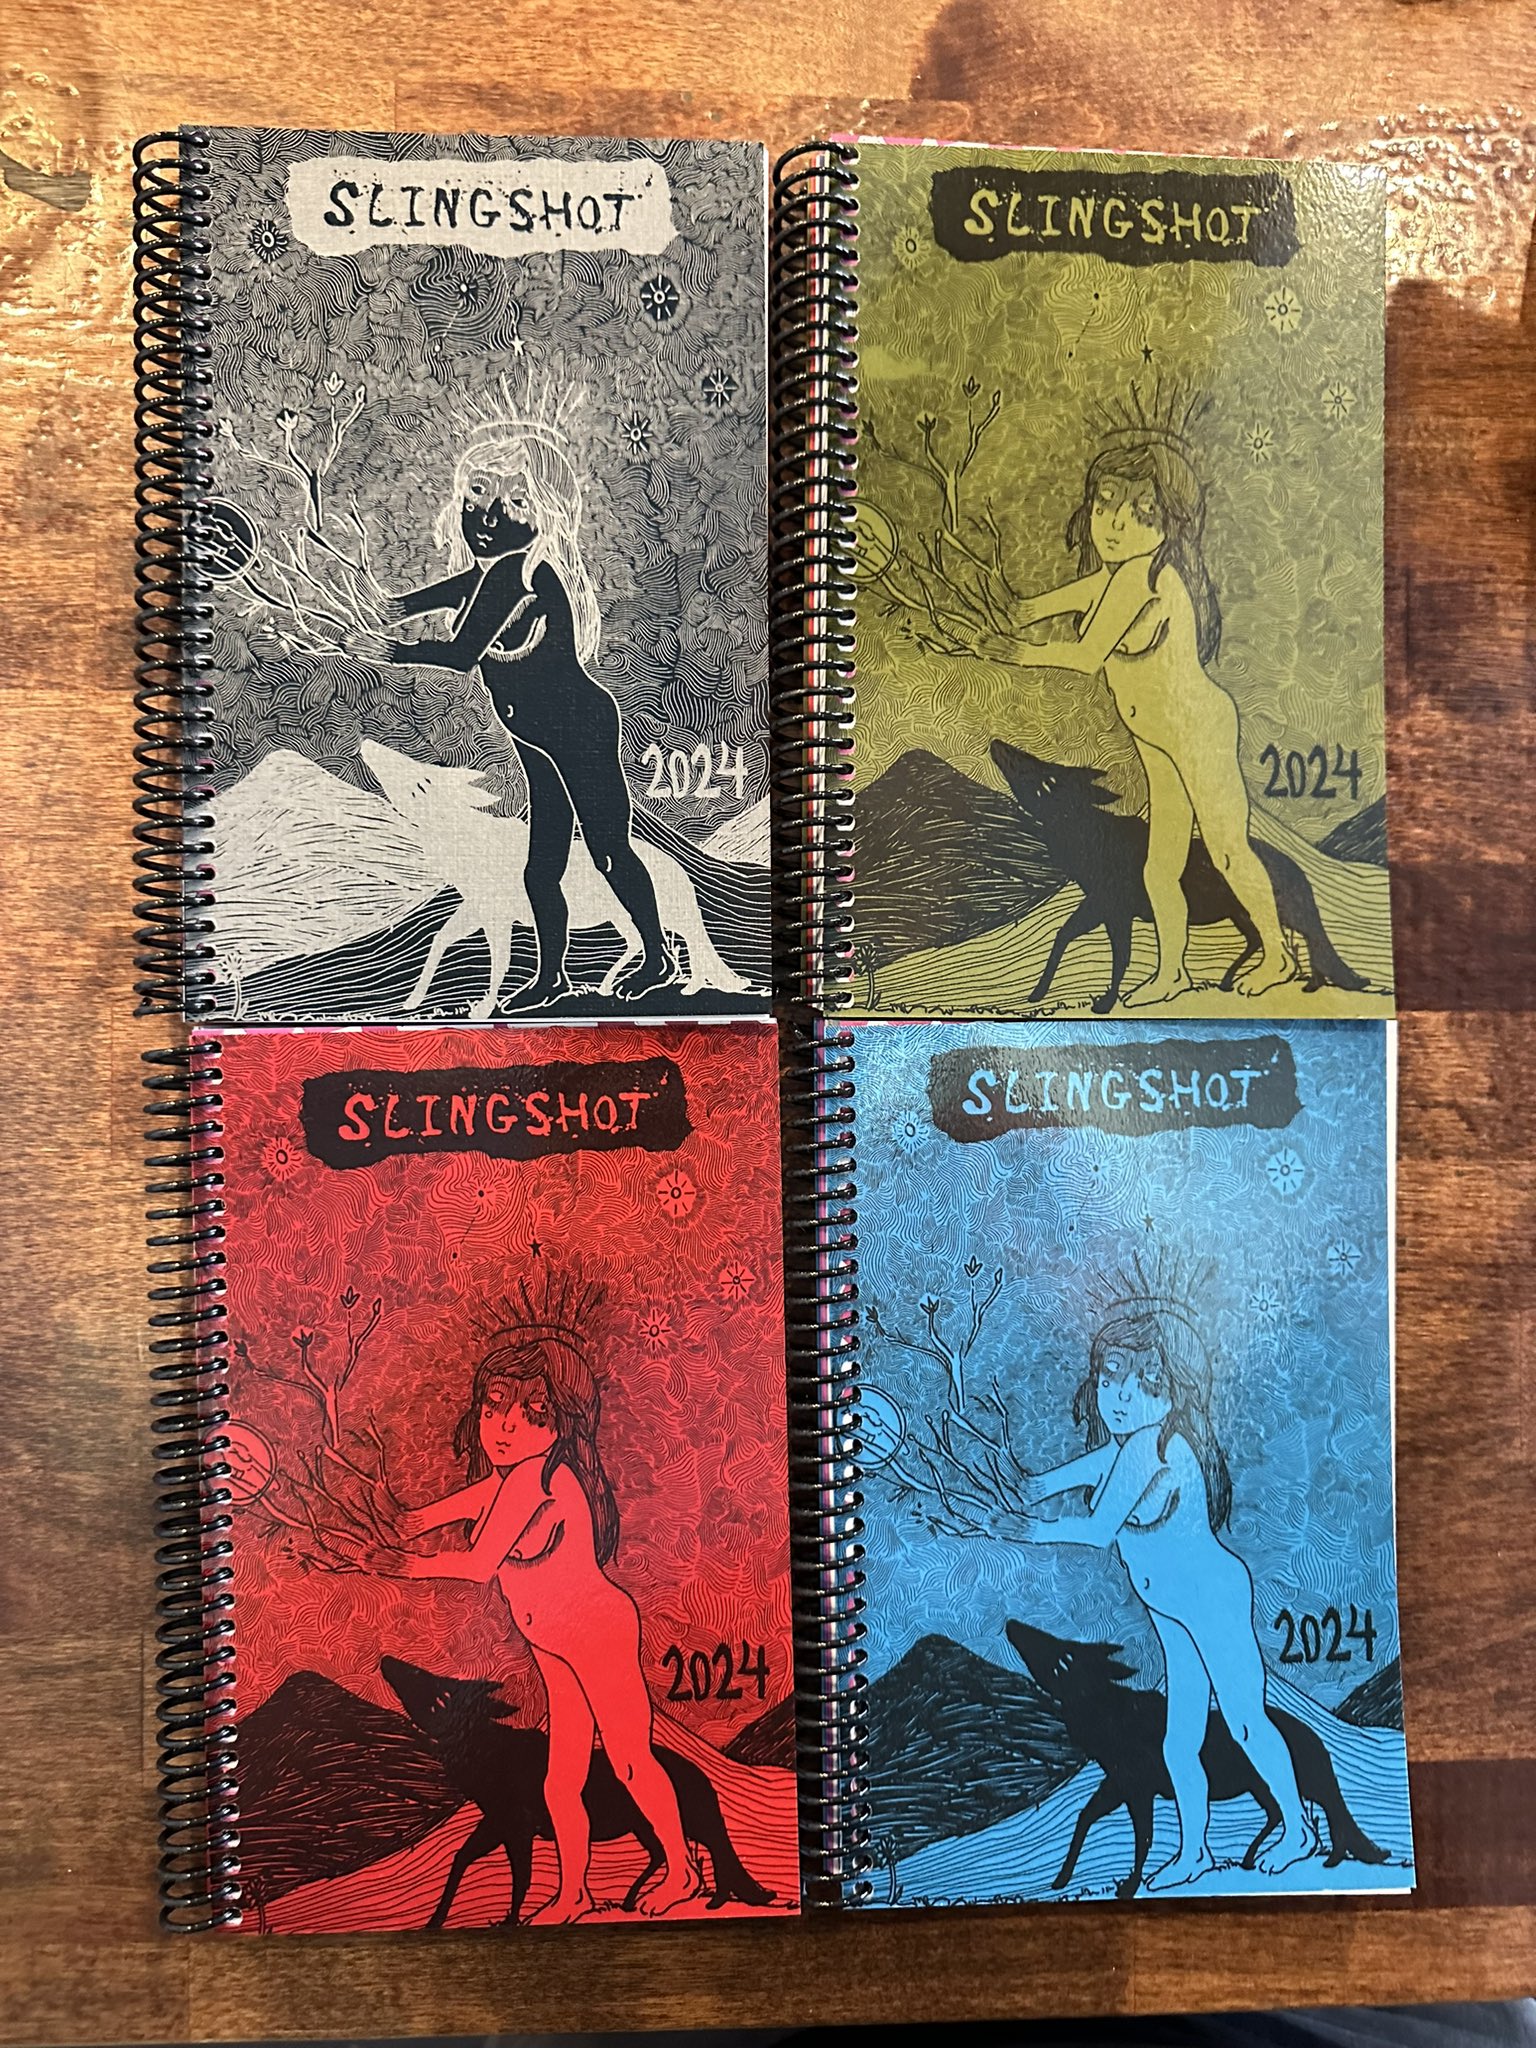 Ash Ave. Comics on X: 2024 is knocking at the door, and we still have a  small selection of the Slingshot radical organizers for the new year. The  large spiral organizers are